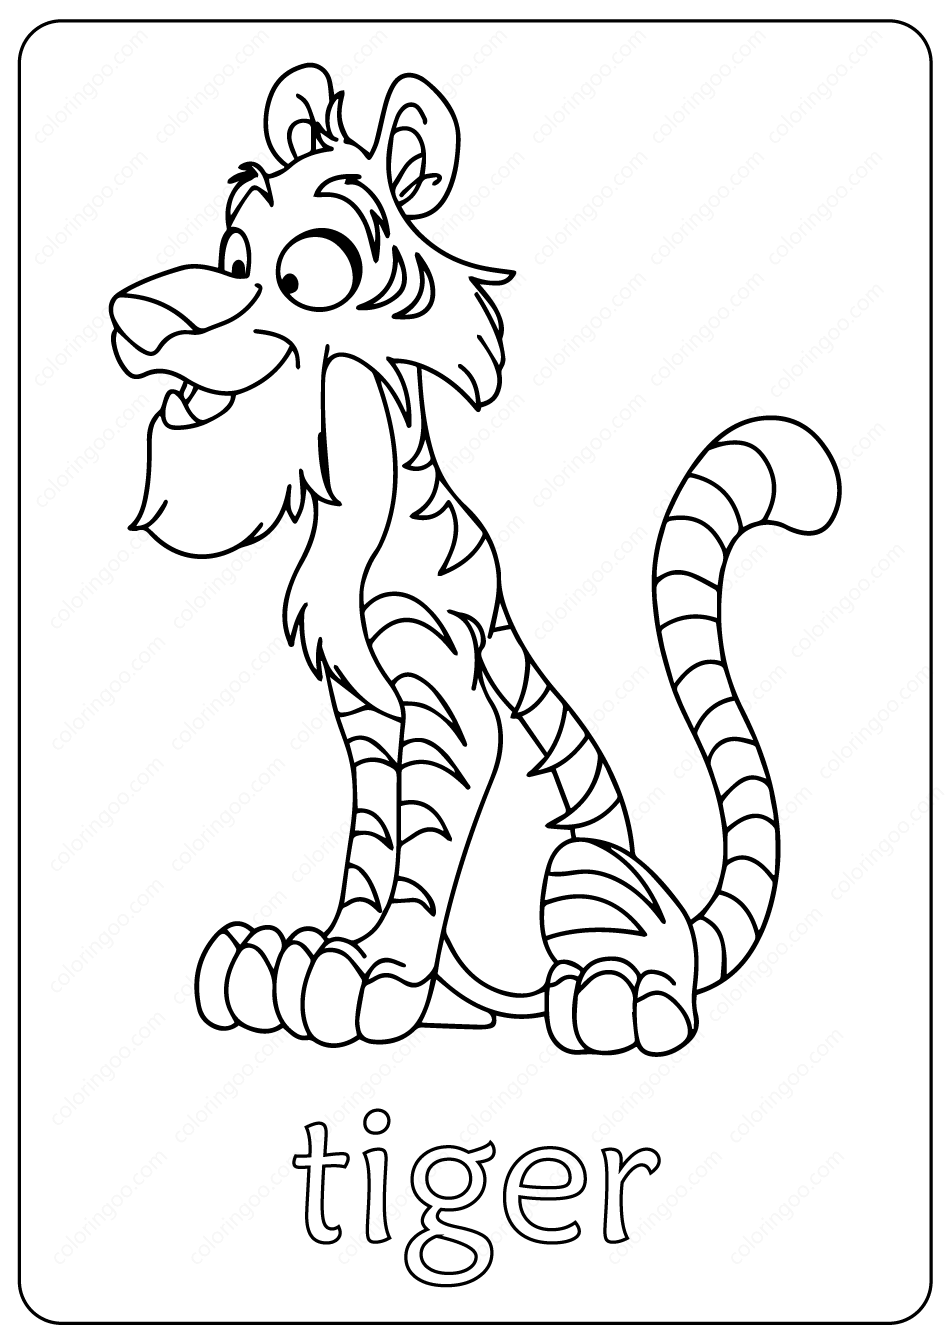 tiger outline coloring page